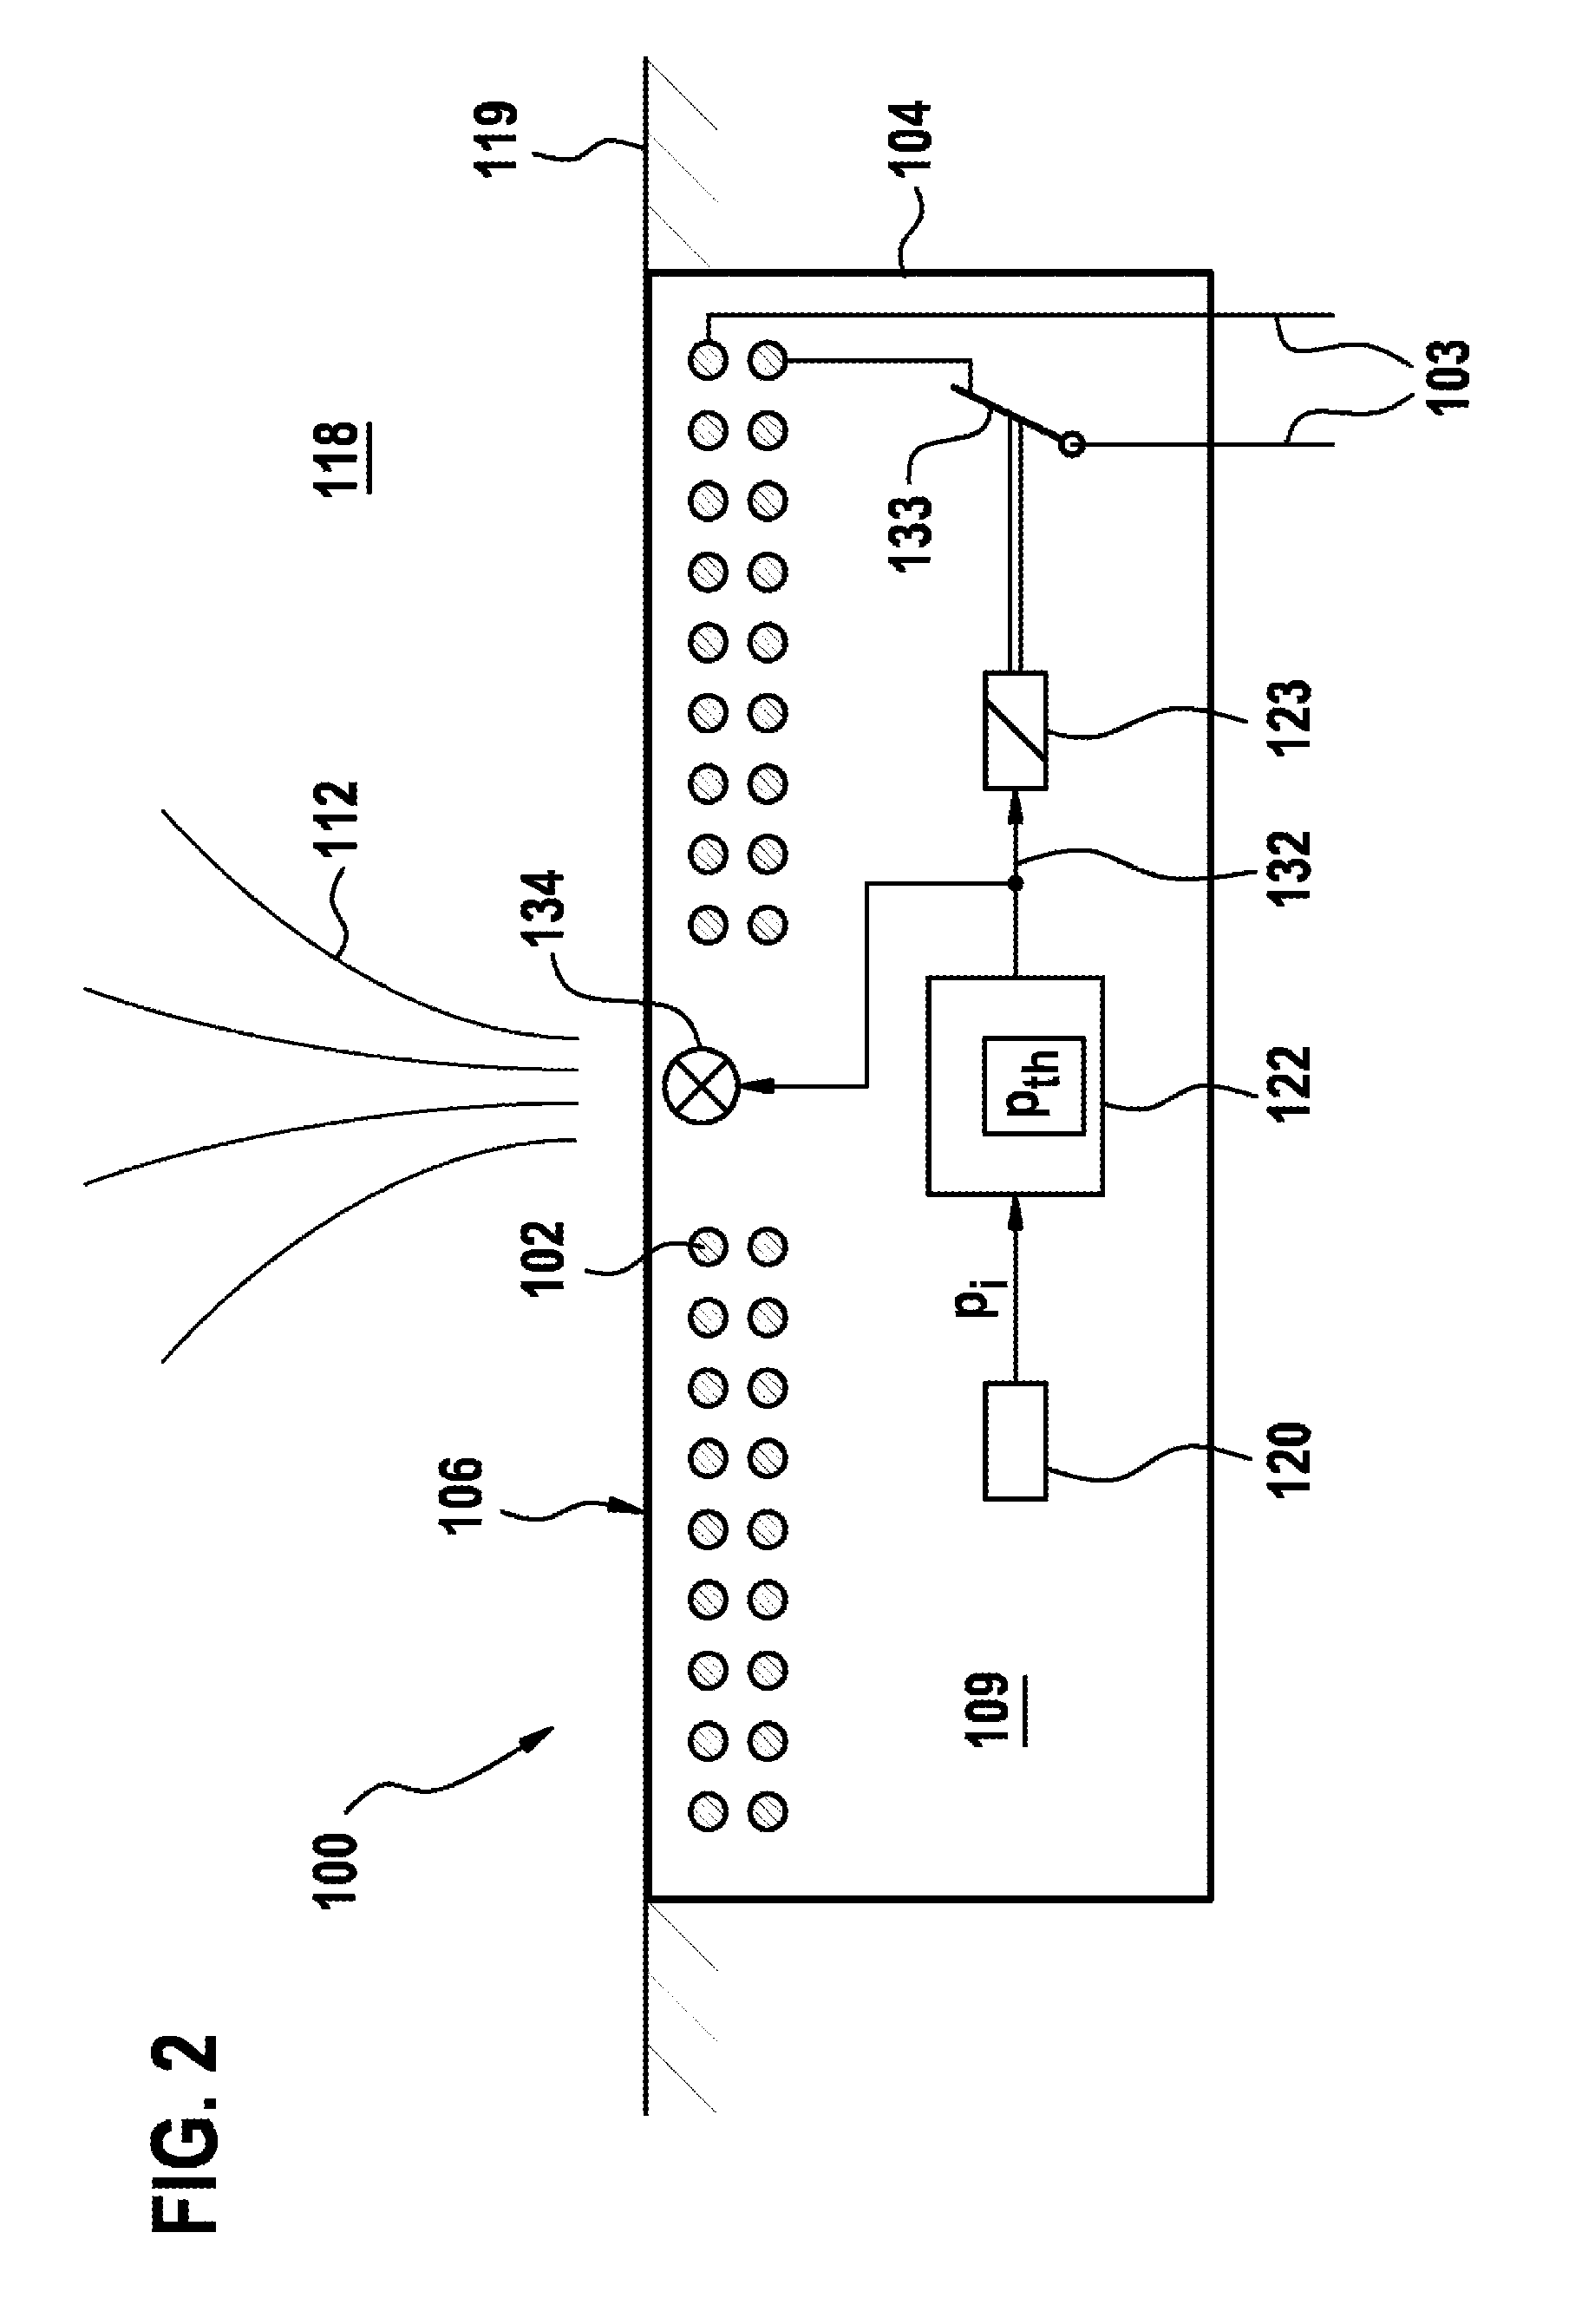 Coil apparatus and method for inductive power transmission